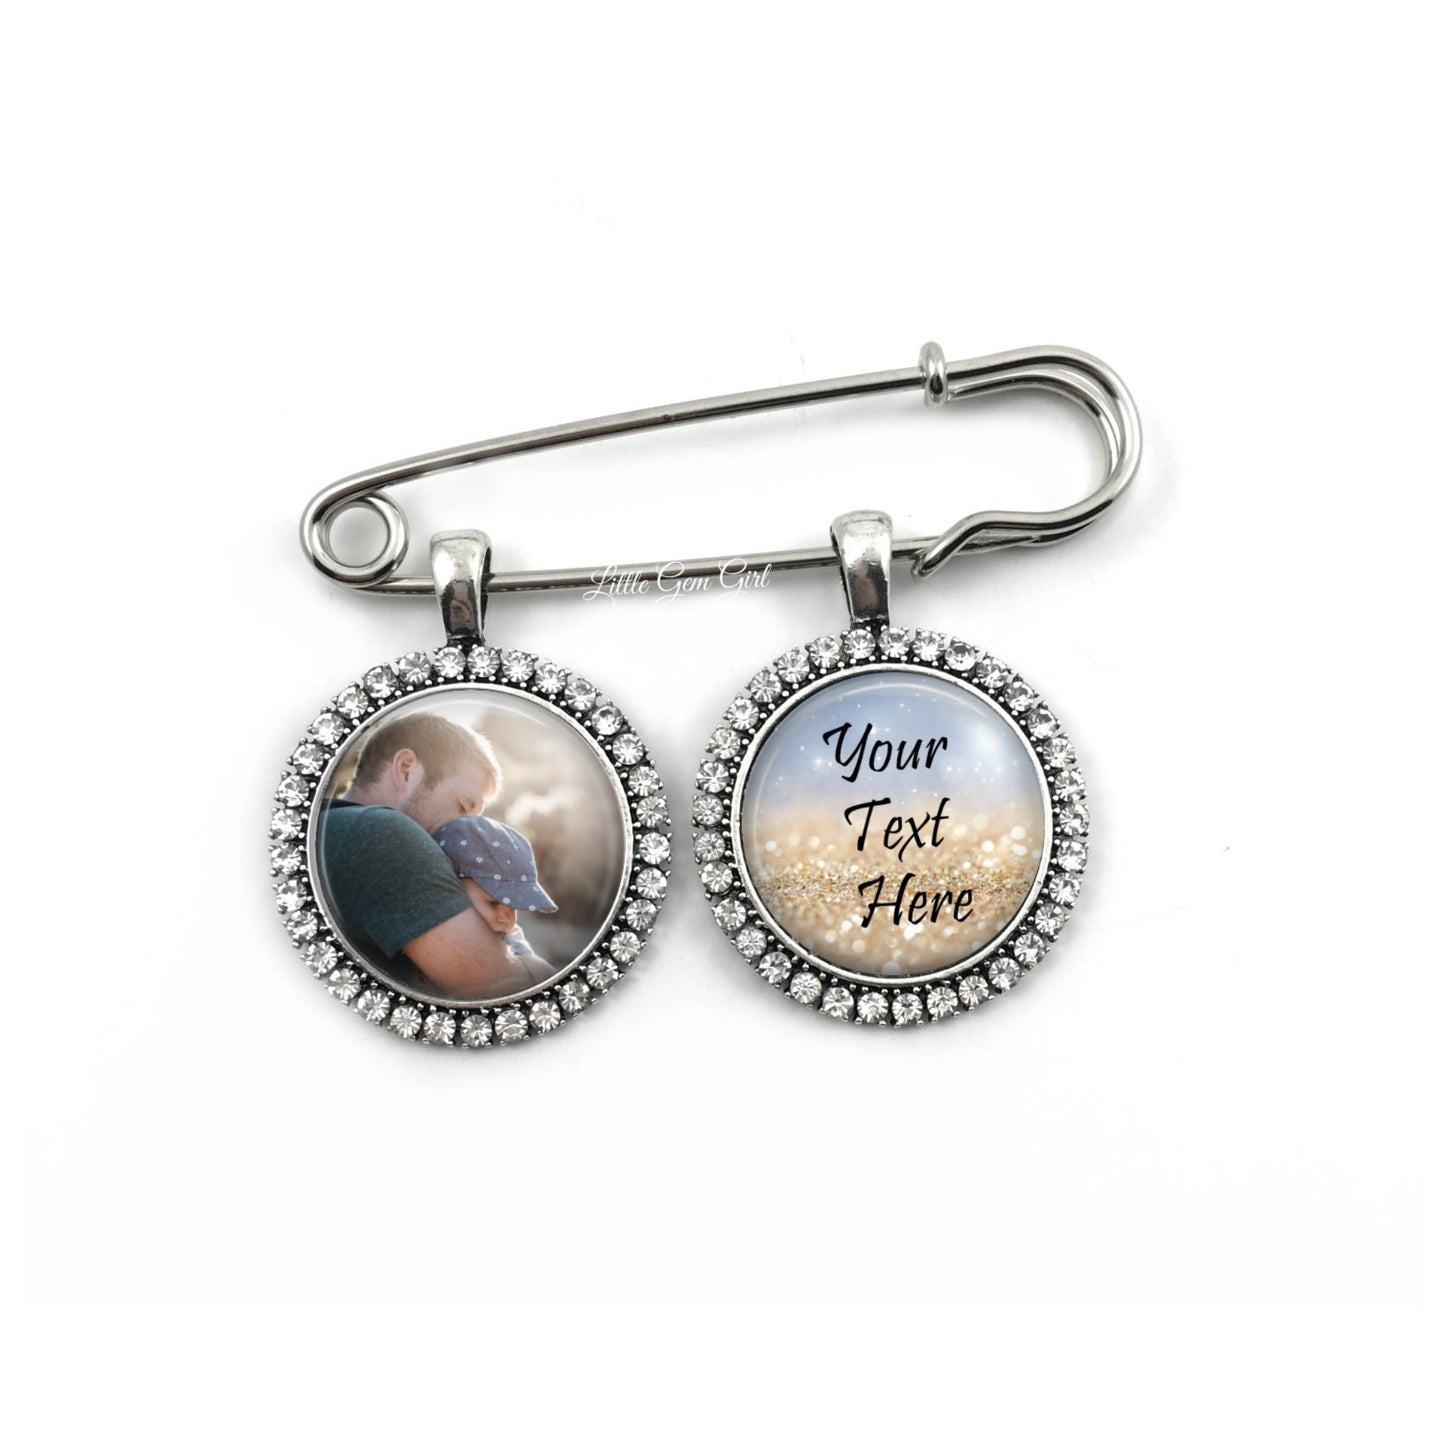 Custom Photo Rhinestone Lapel Pin Charms with Your Custom Text - 2 Charm Rhinestone Available in Four Colors - Wedding Boutonniere Photo Pendant